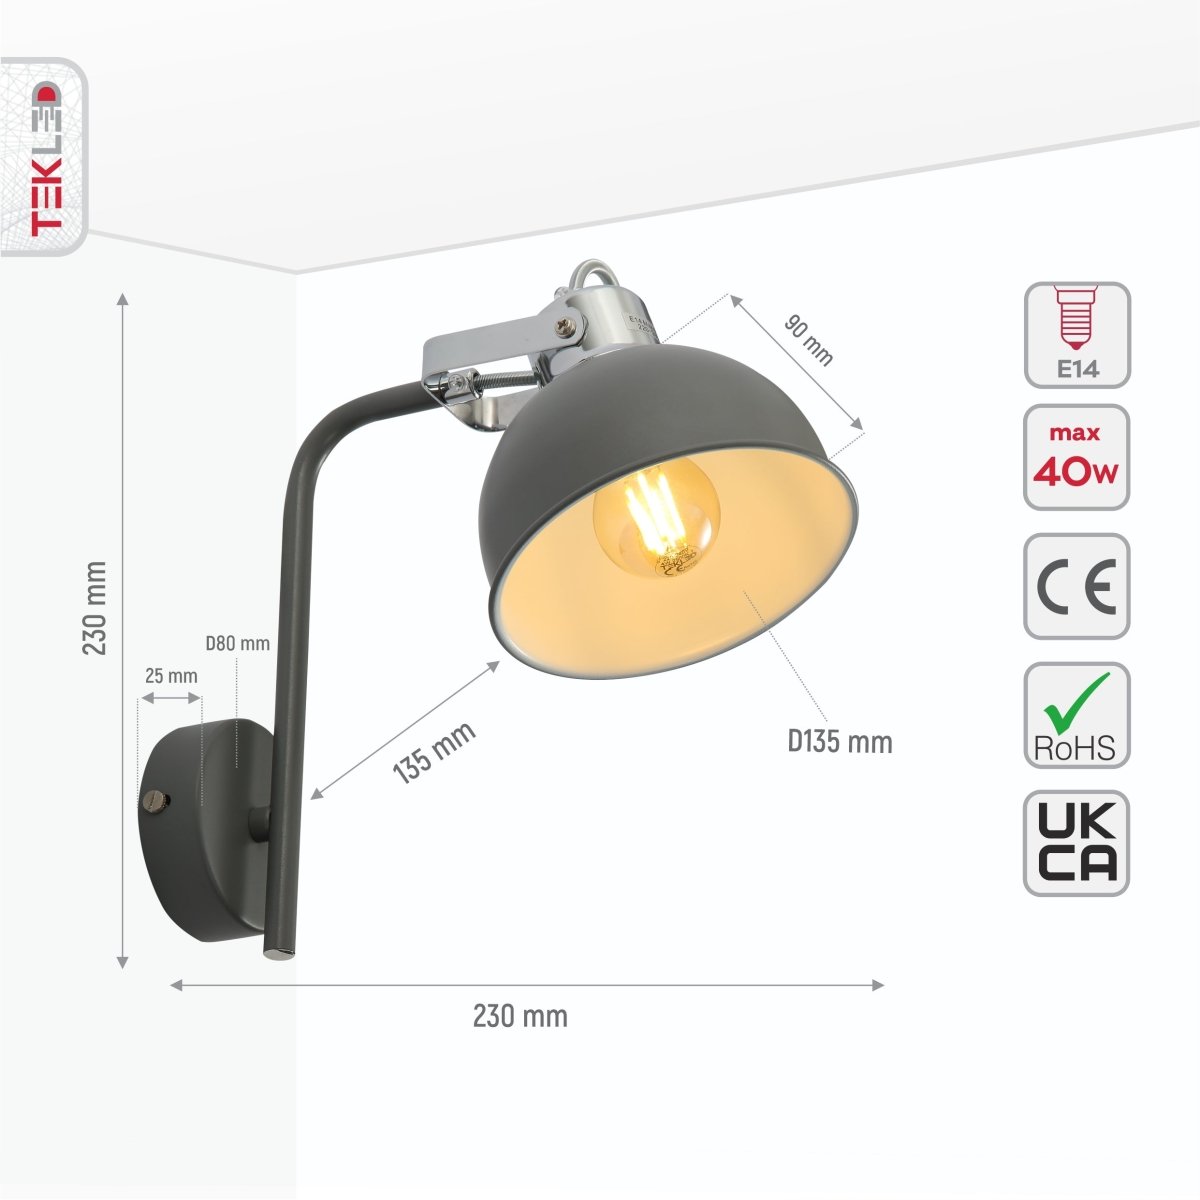 Size and specs of Grey Dome Adjustable Wall Light E14 | TEKLED 151-19802